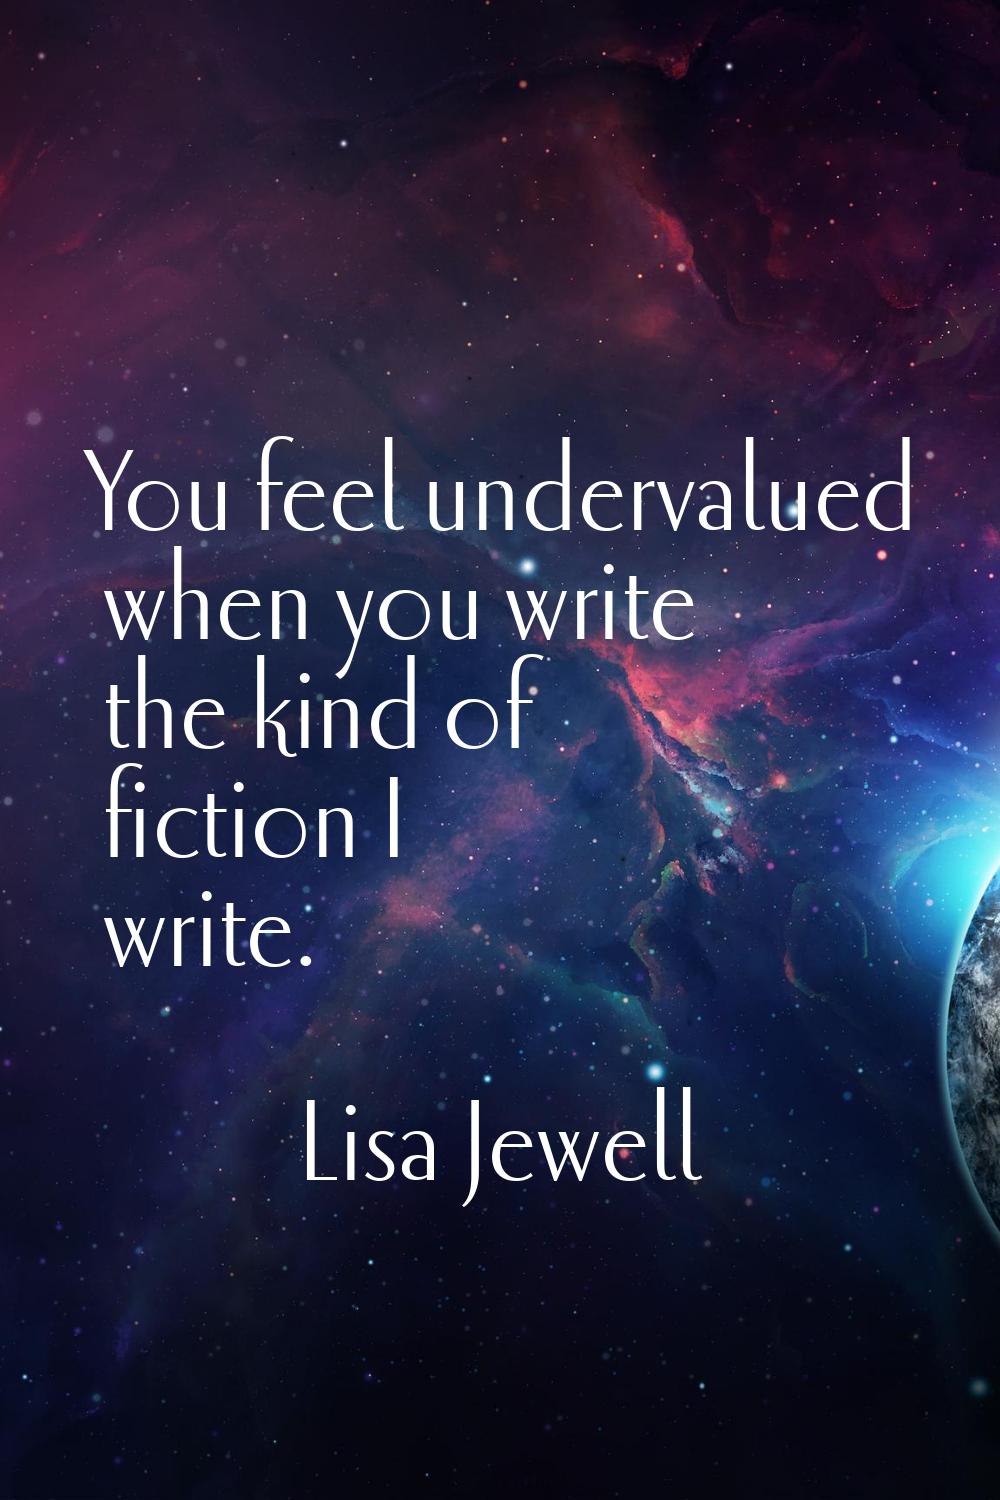 You feel undervalued when you write the kind of fiction I write.